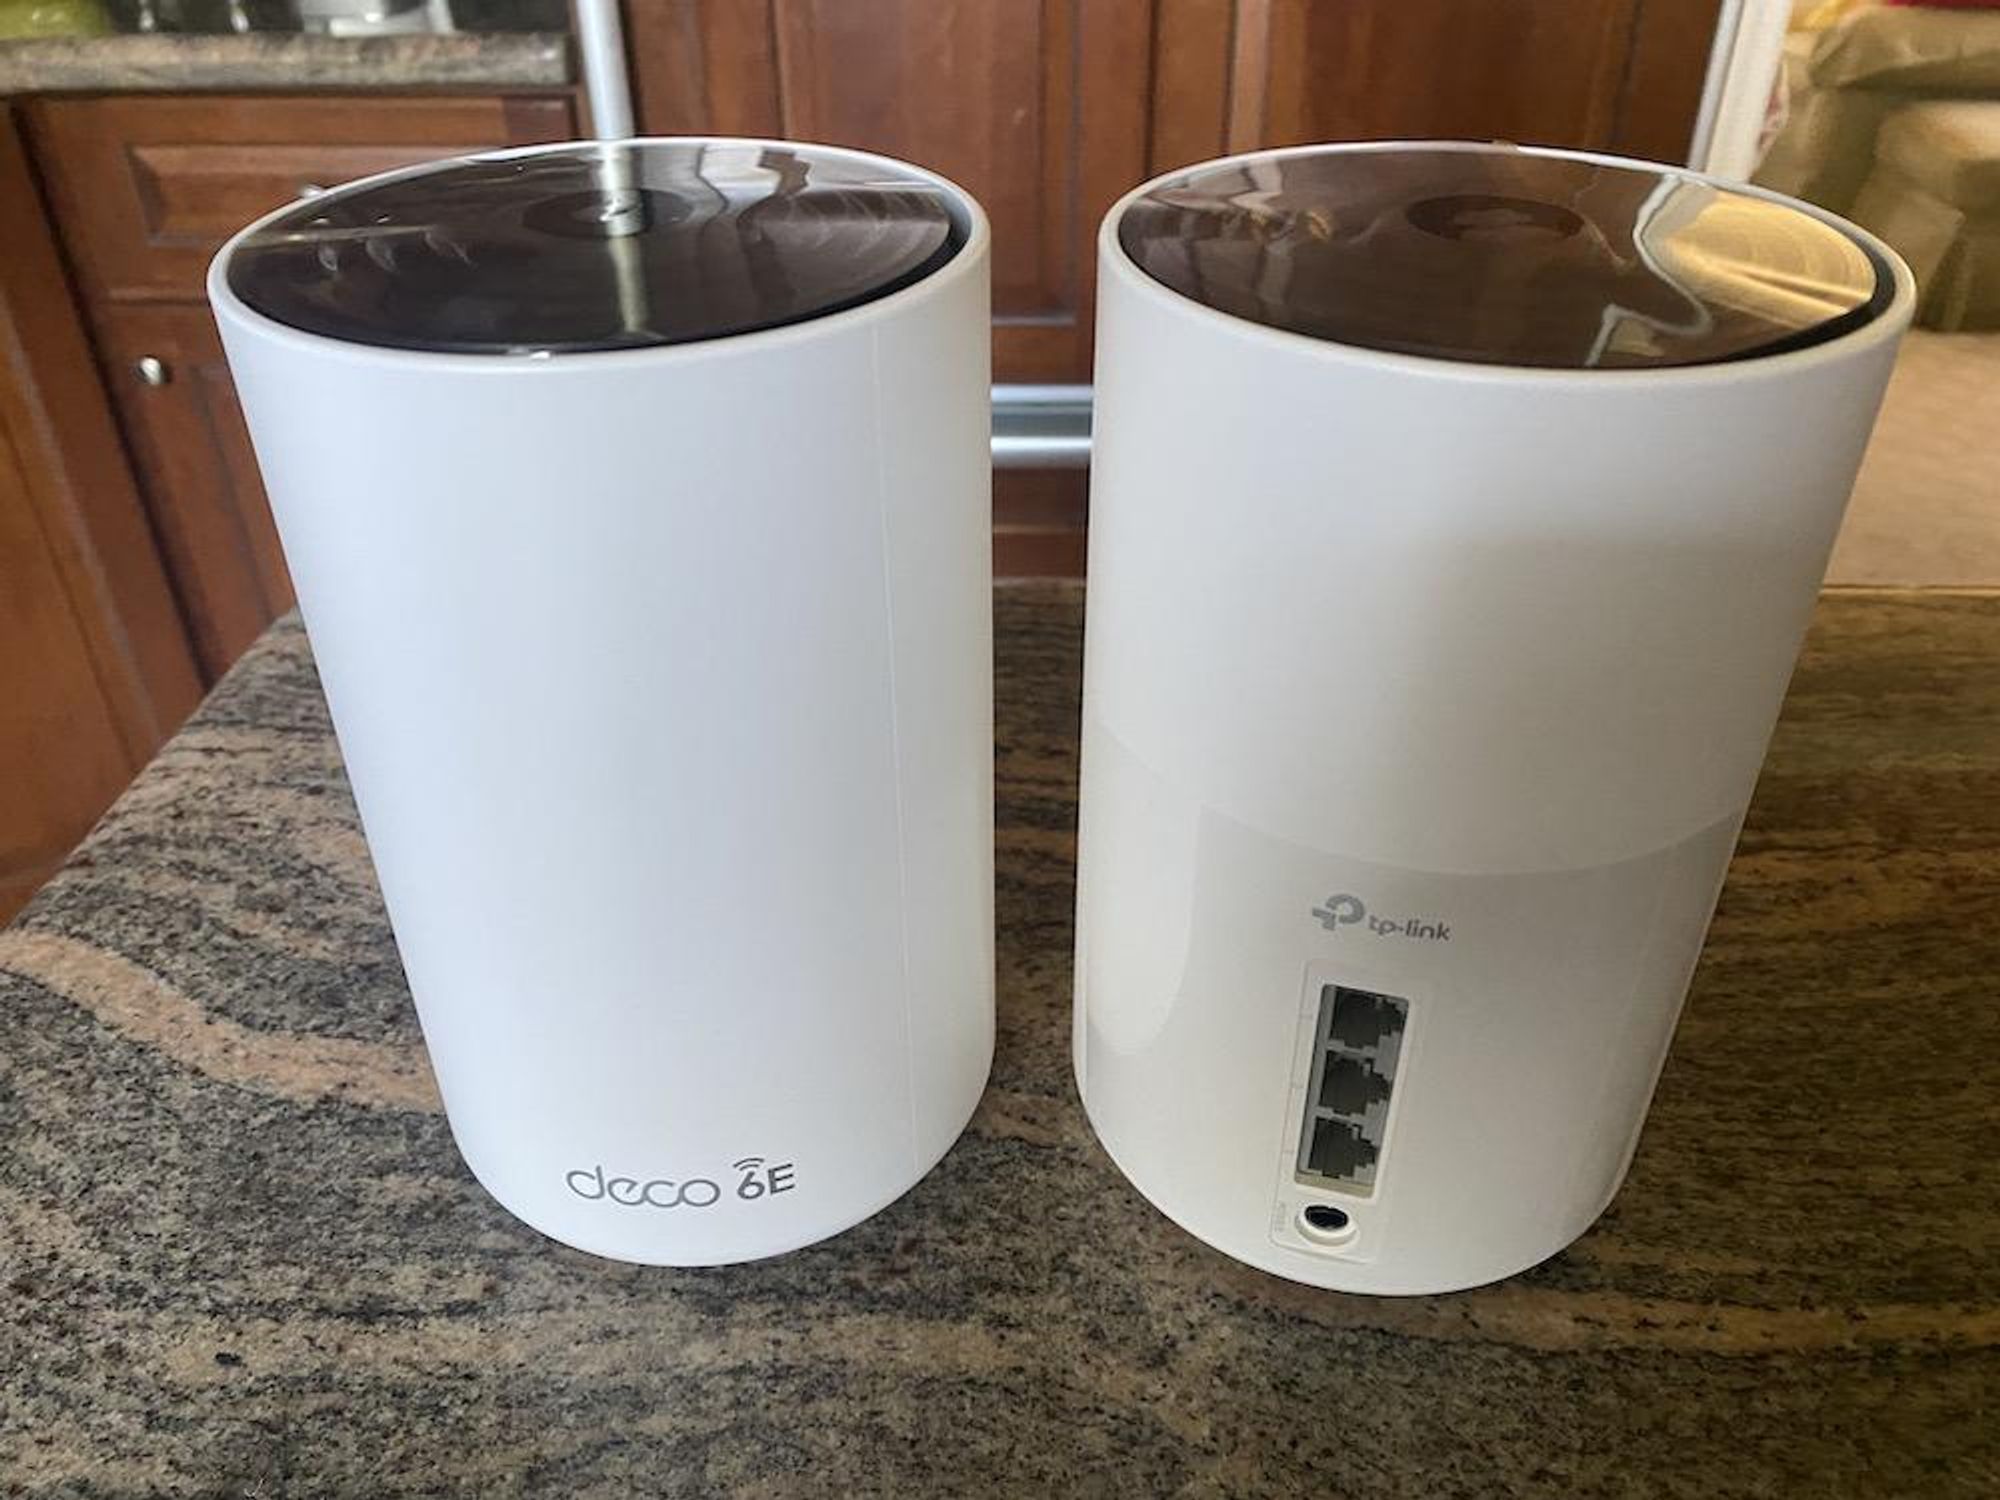 TP-Link Deco XE75 Review: FAST, Affordable Mesh WiFi 6E EVERYWHERE In Your  Home!